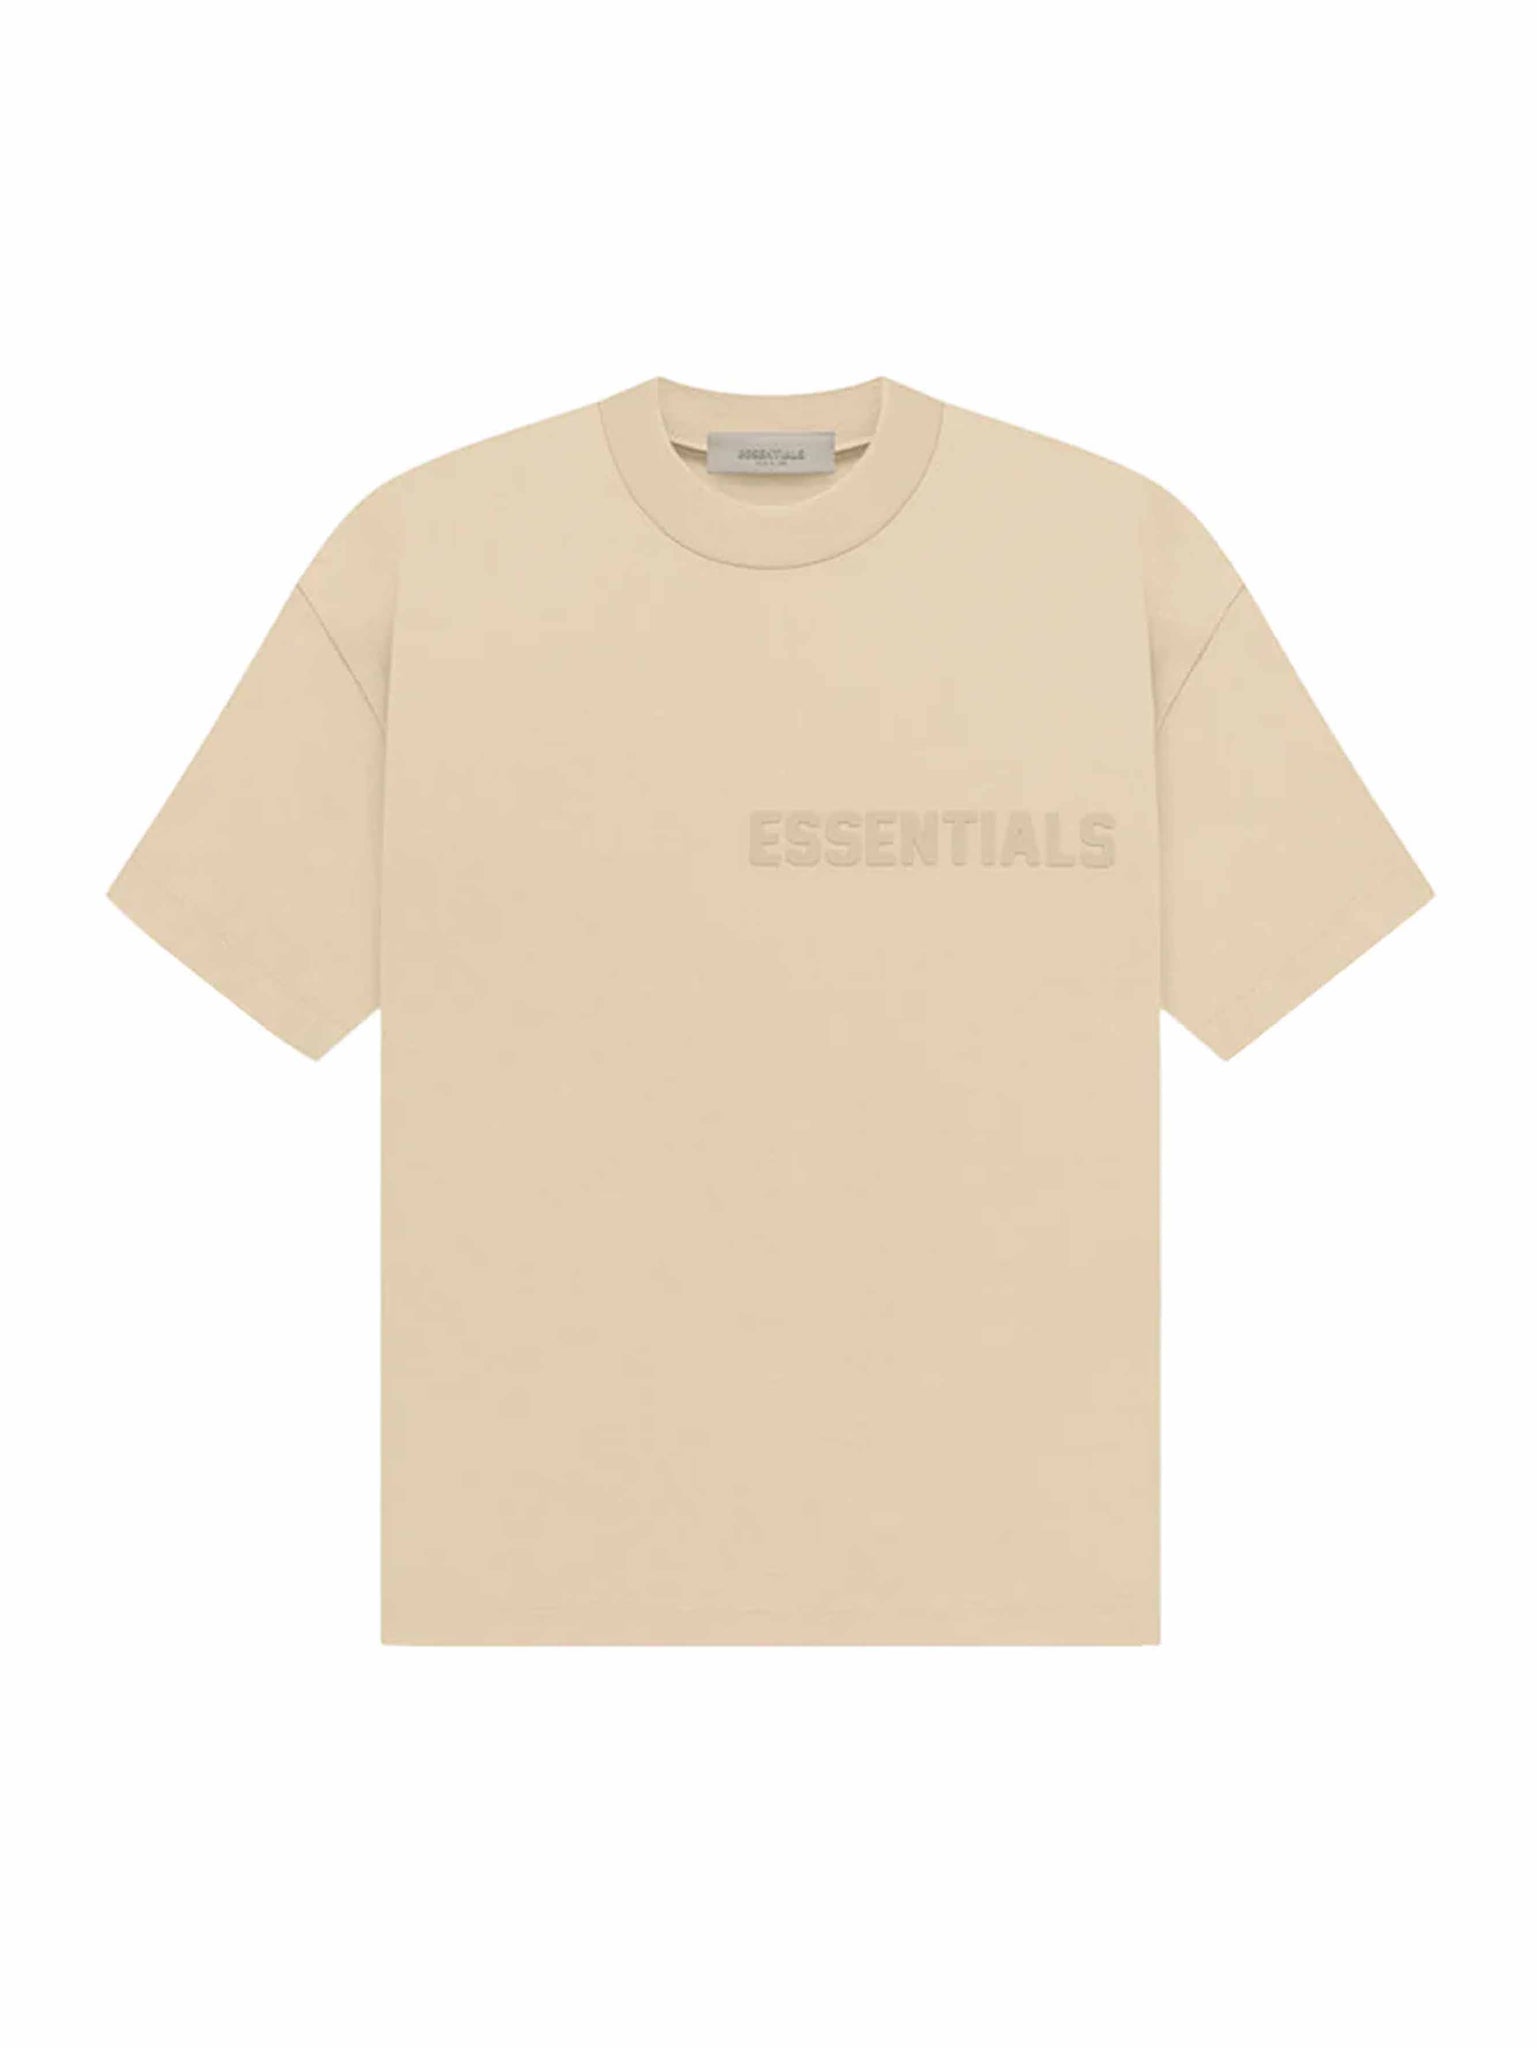 Fear of God Essentials SS Tee Sand - Prior